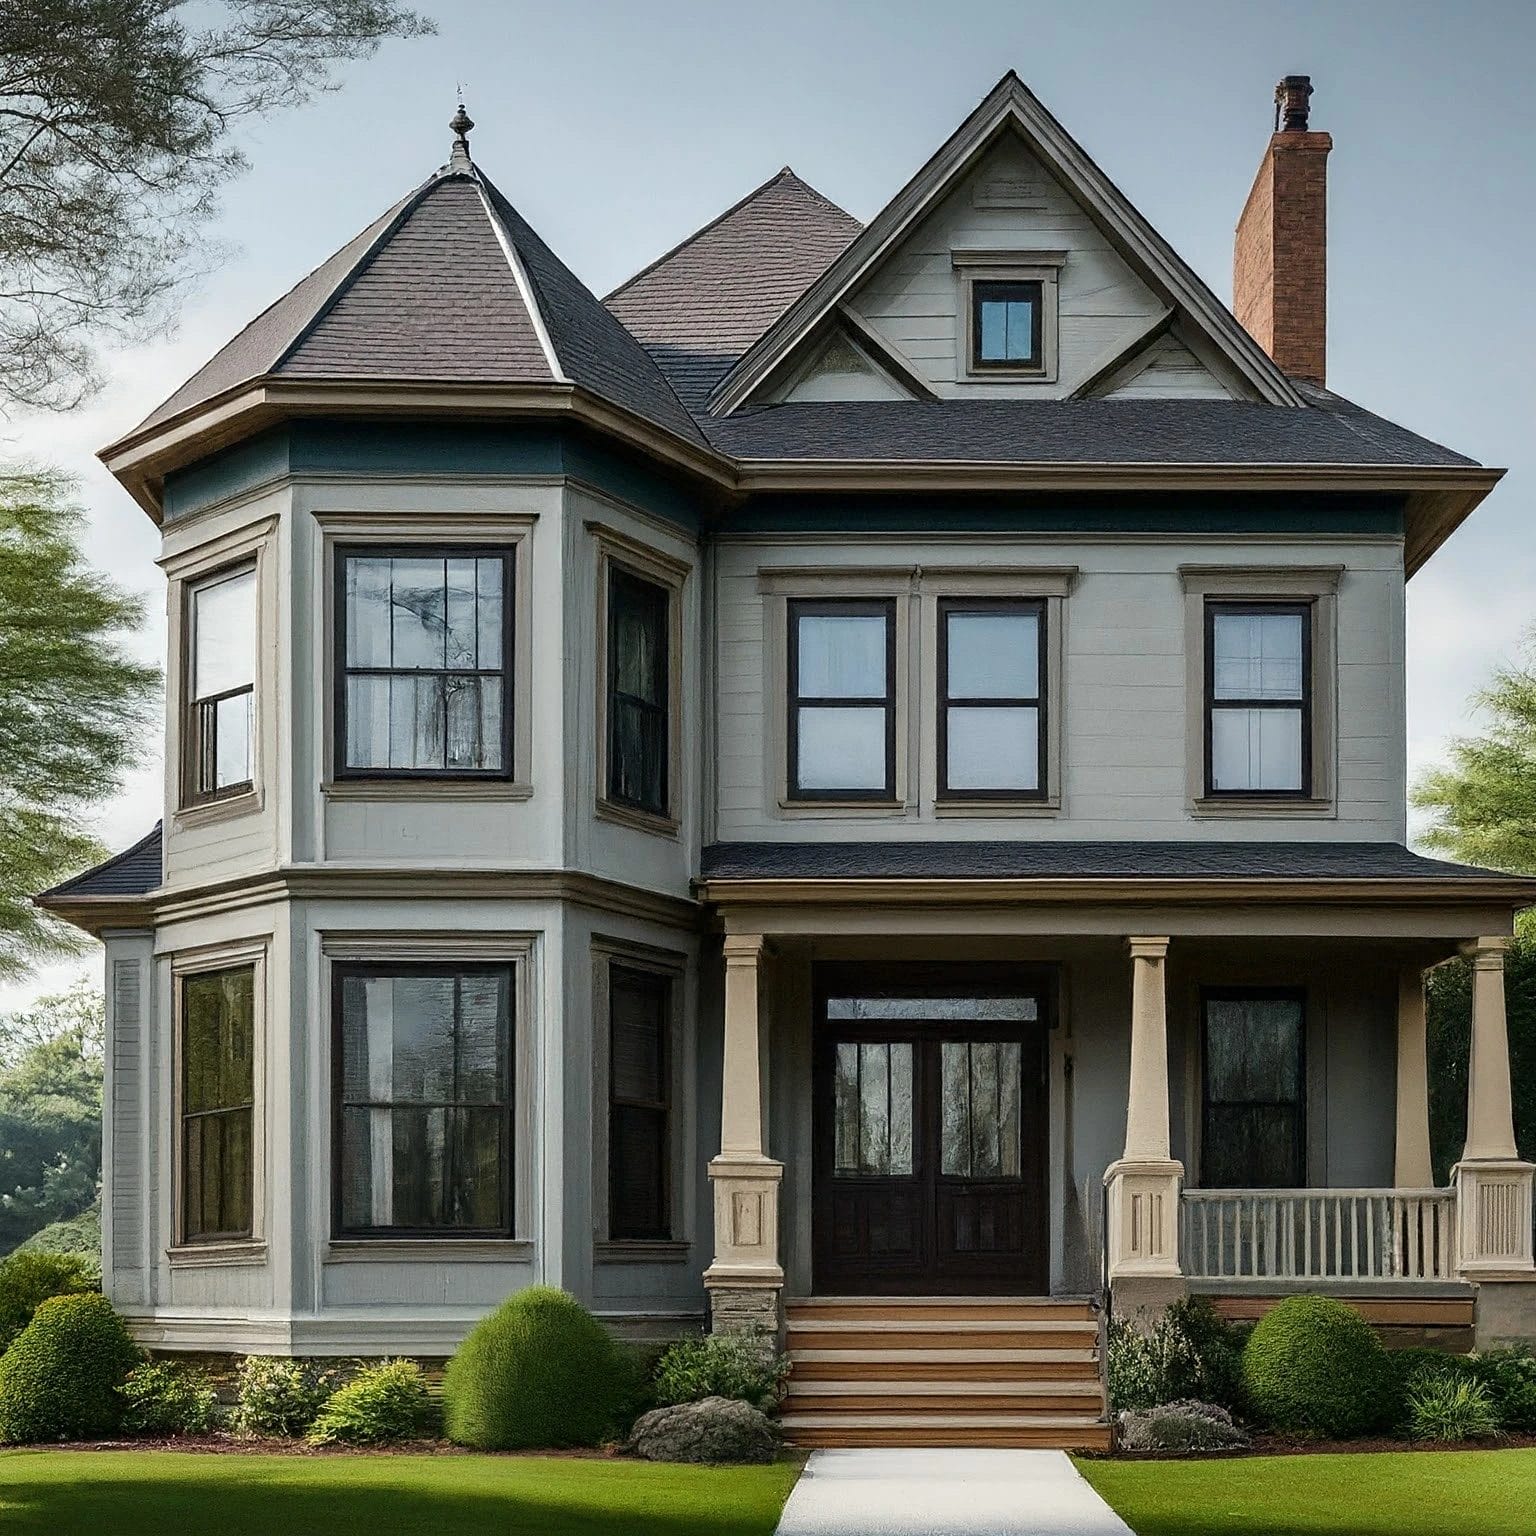 Modern Victorian Home Architectural Plans